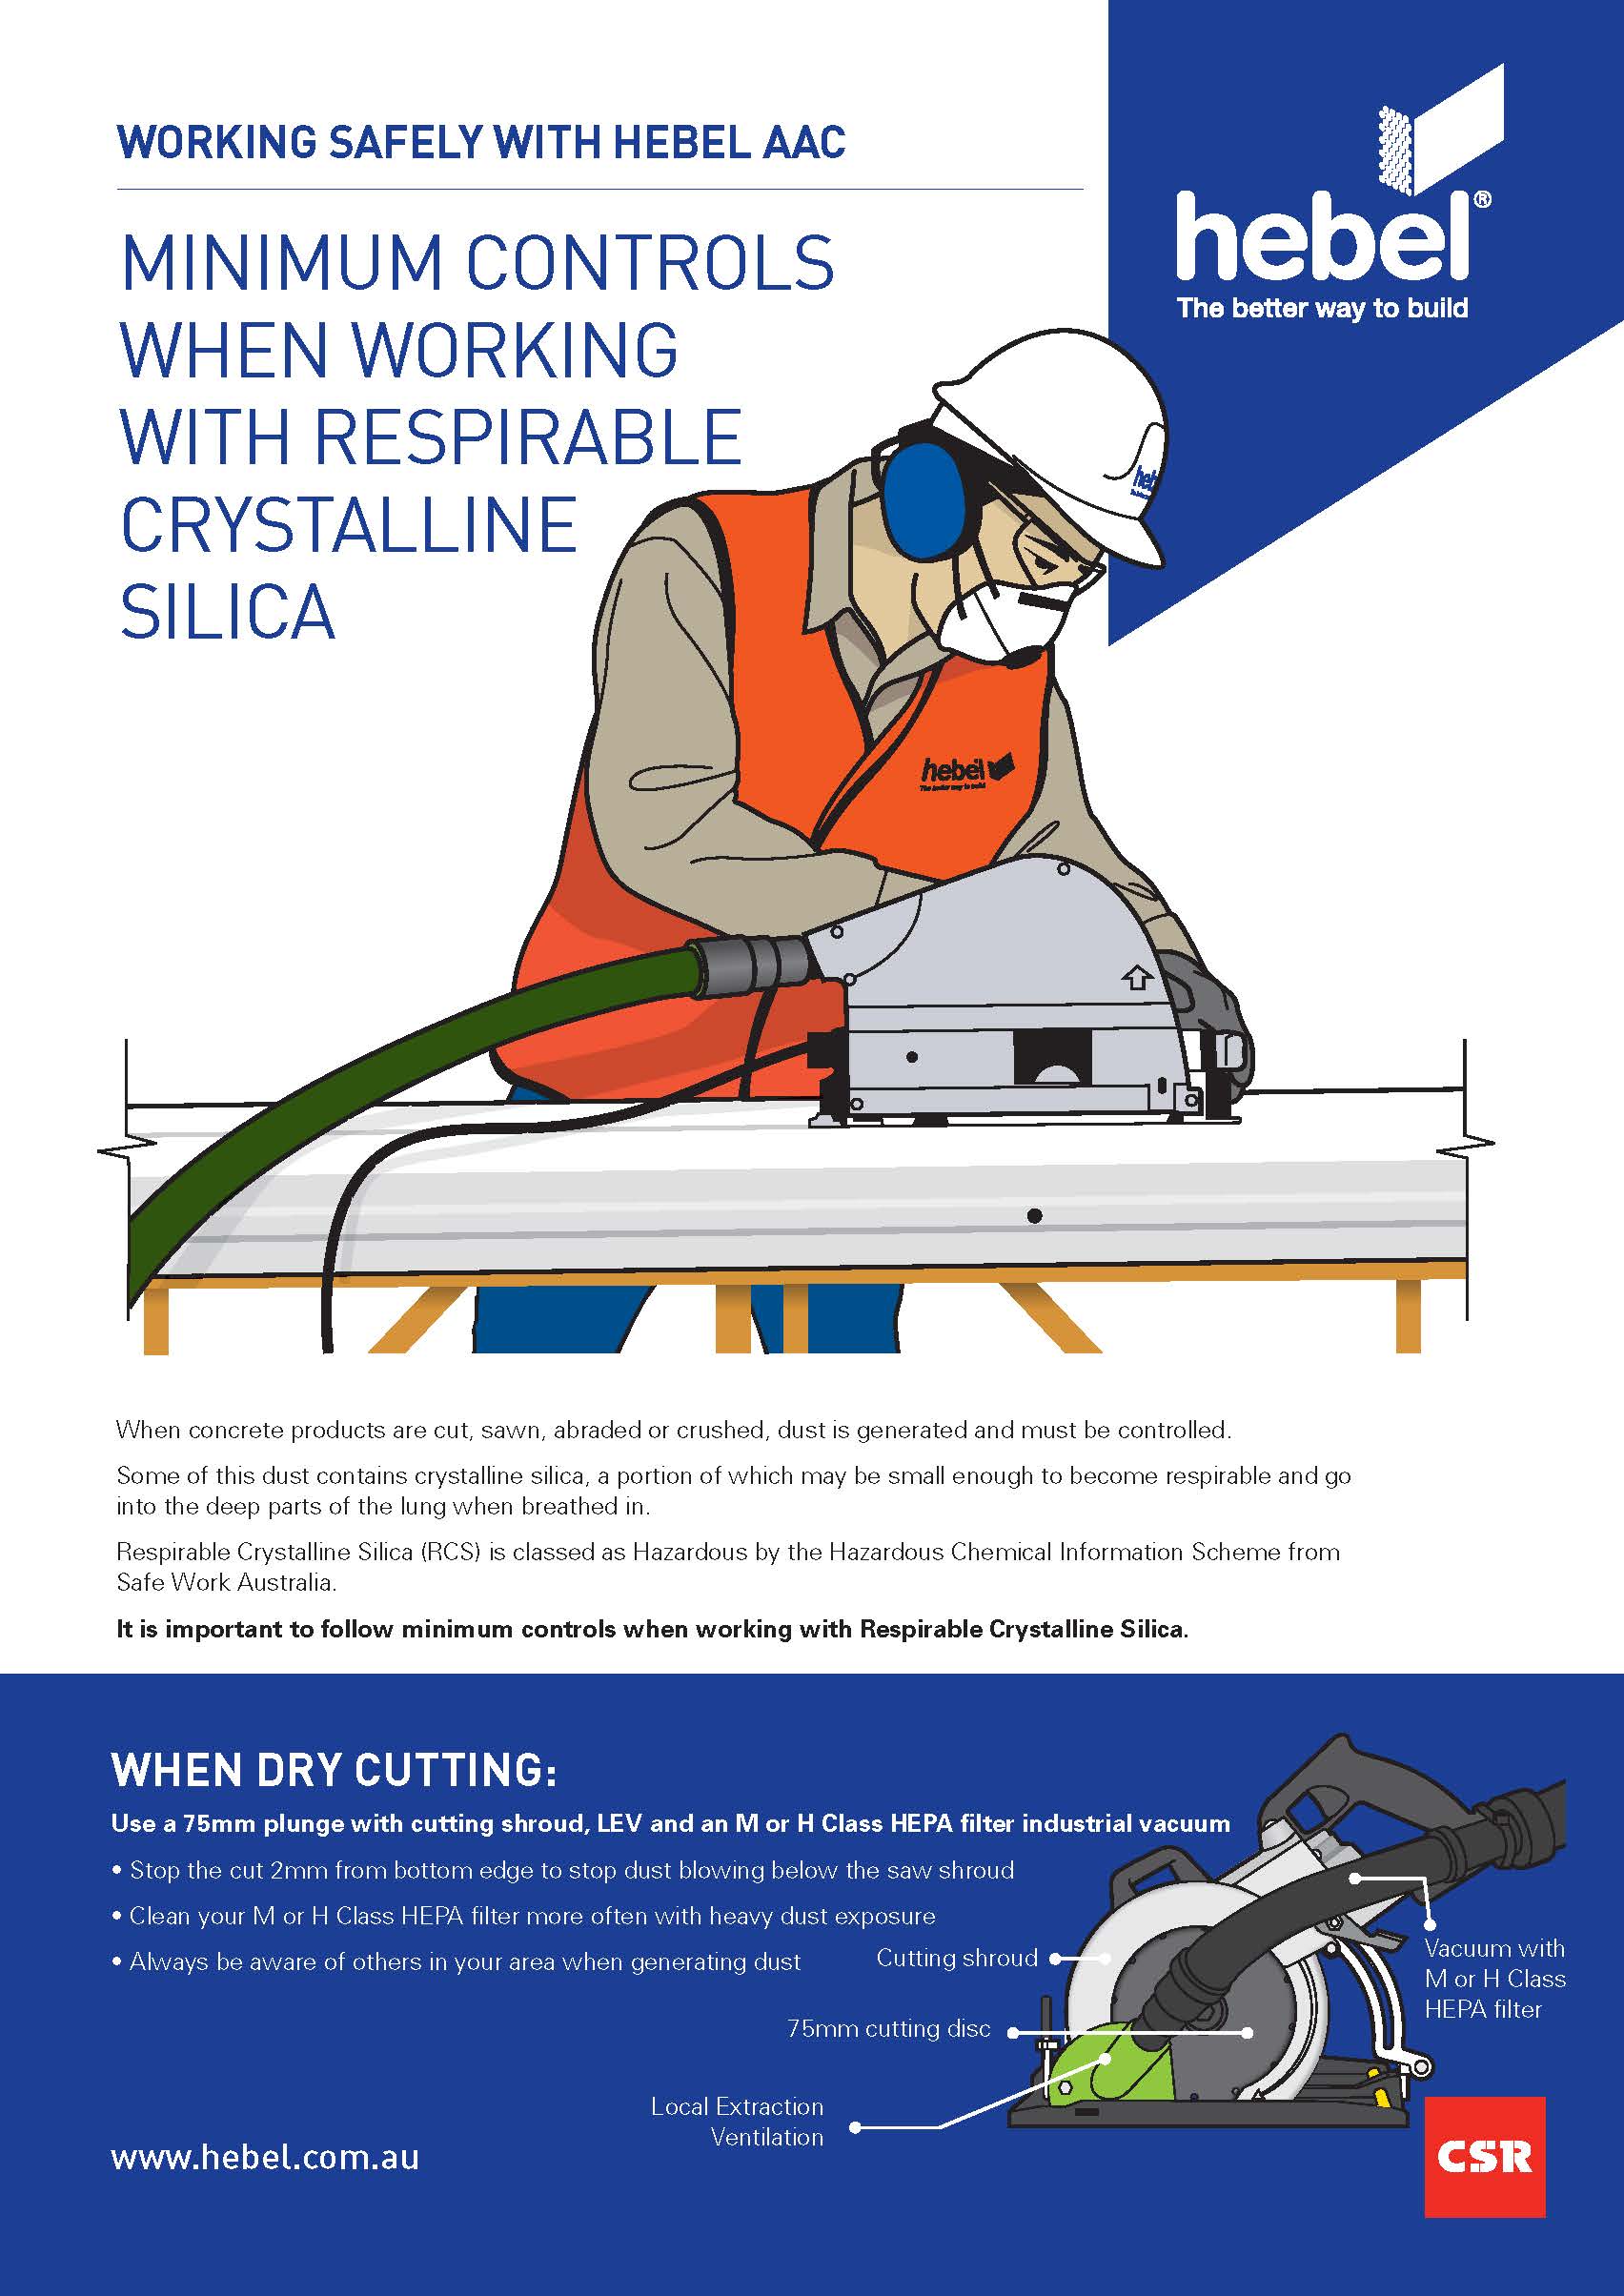 Hebel Safety Guide - cutting & cleaning of Hebel AAC